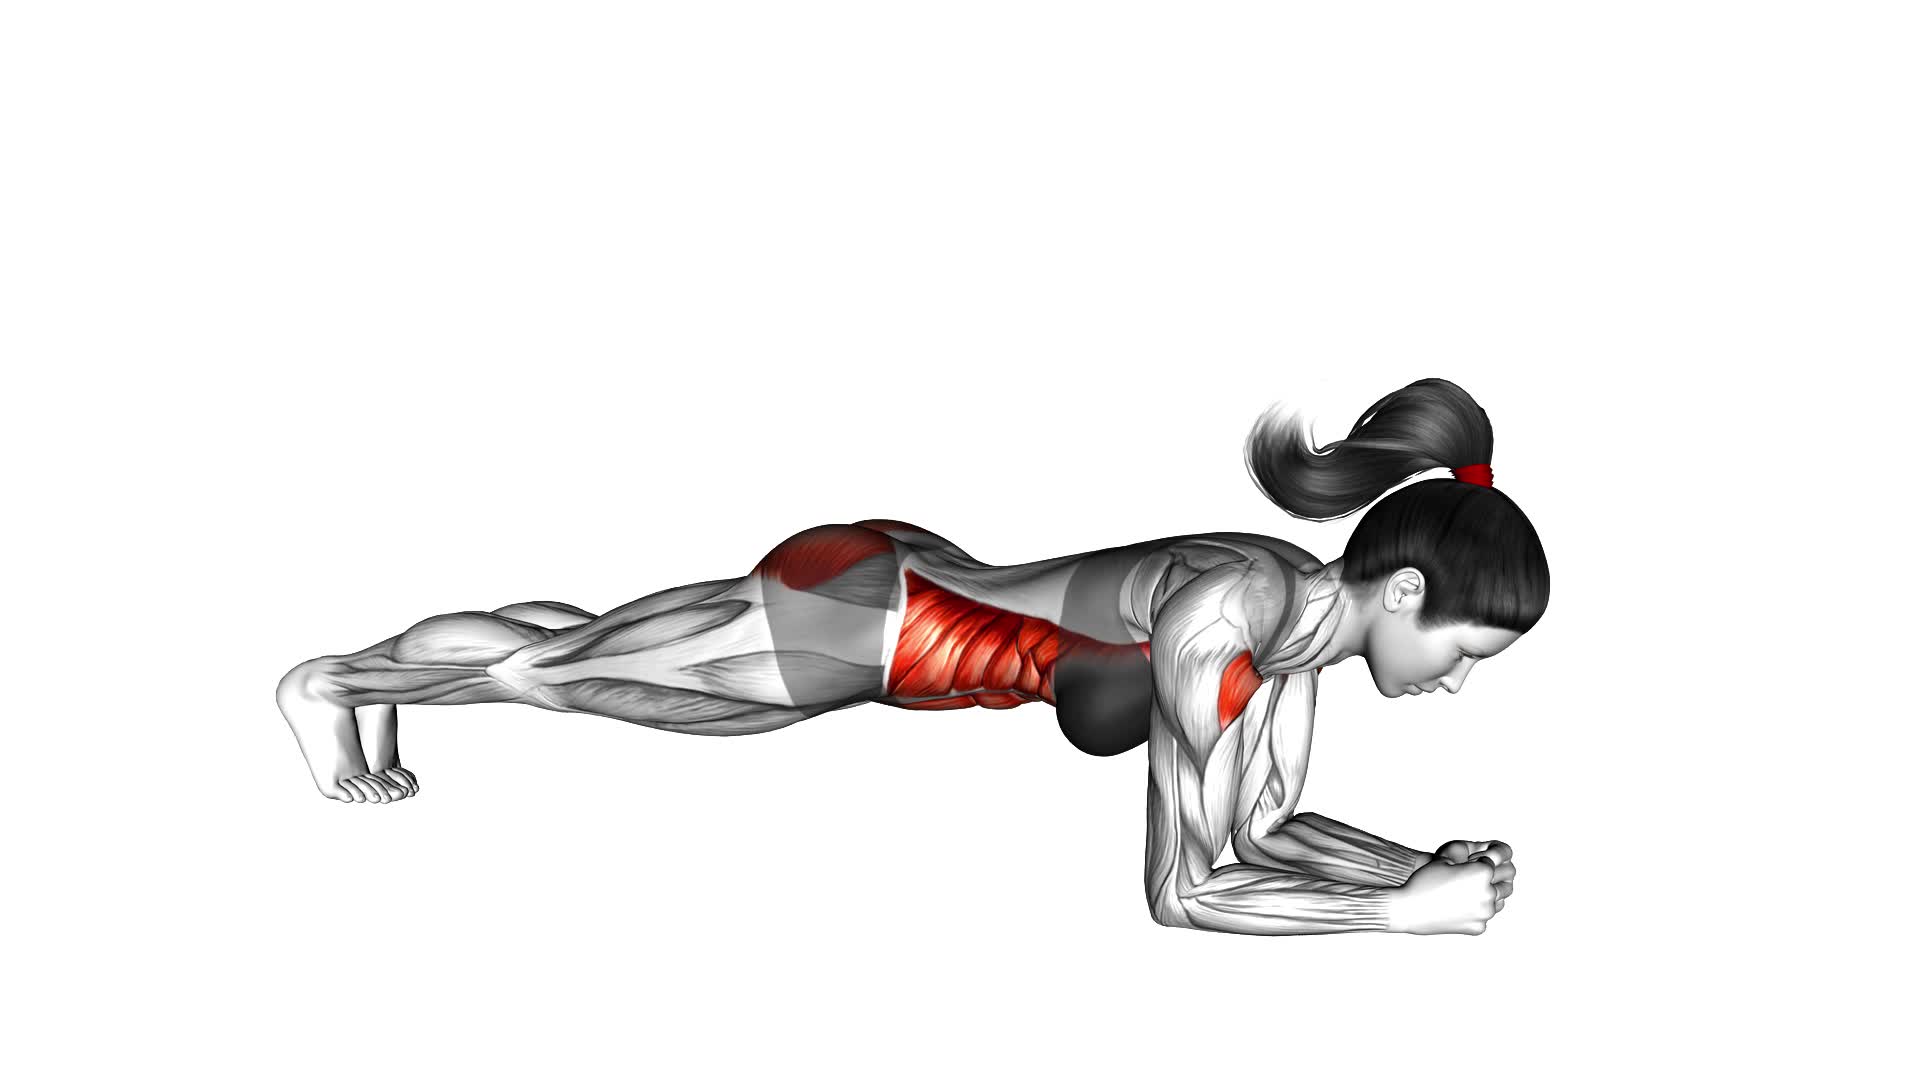 Elbow Push up (female) - Video Exercise Guide & Tips